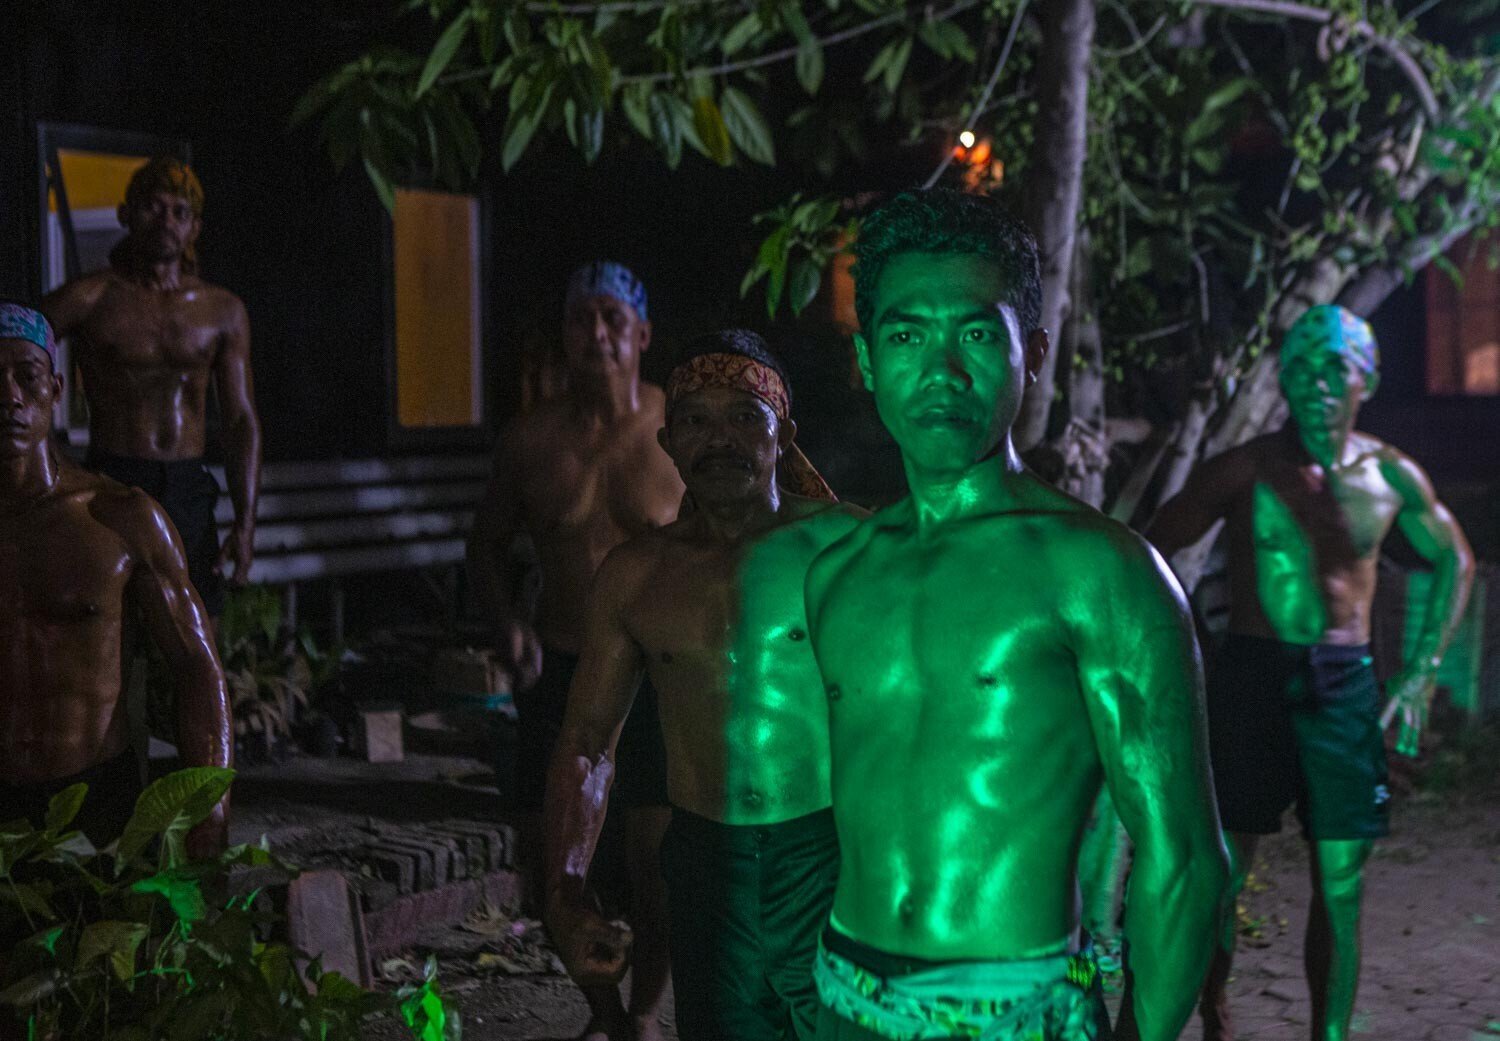 Bodybuilding contestants wait their turn to show their moves. Photo: Agoes Rudianto